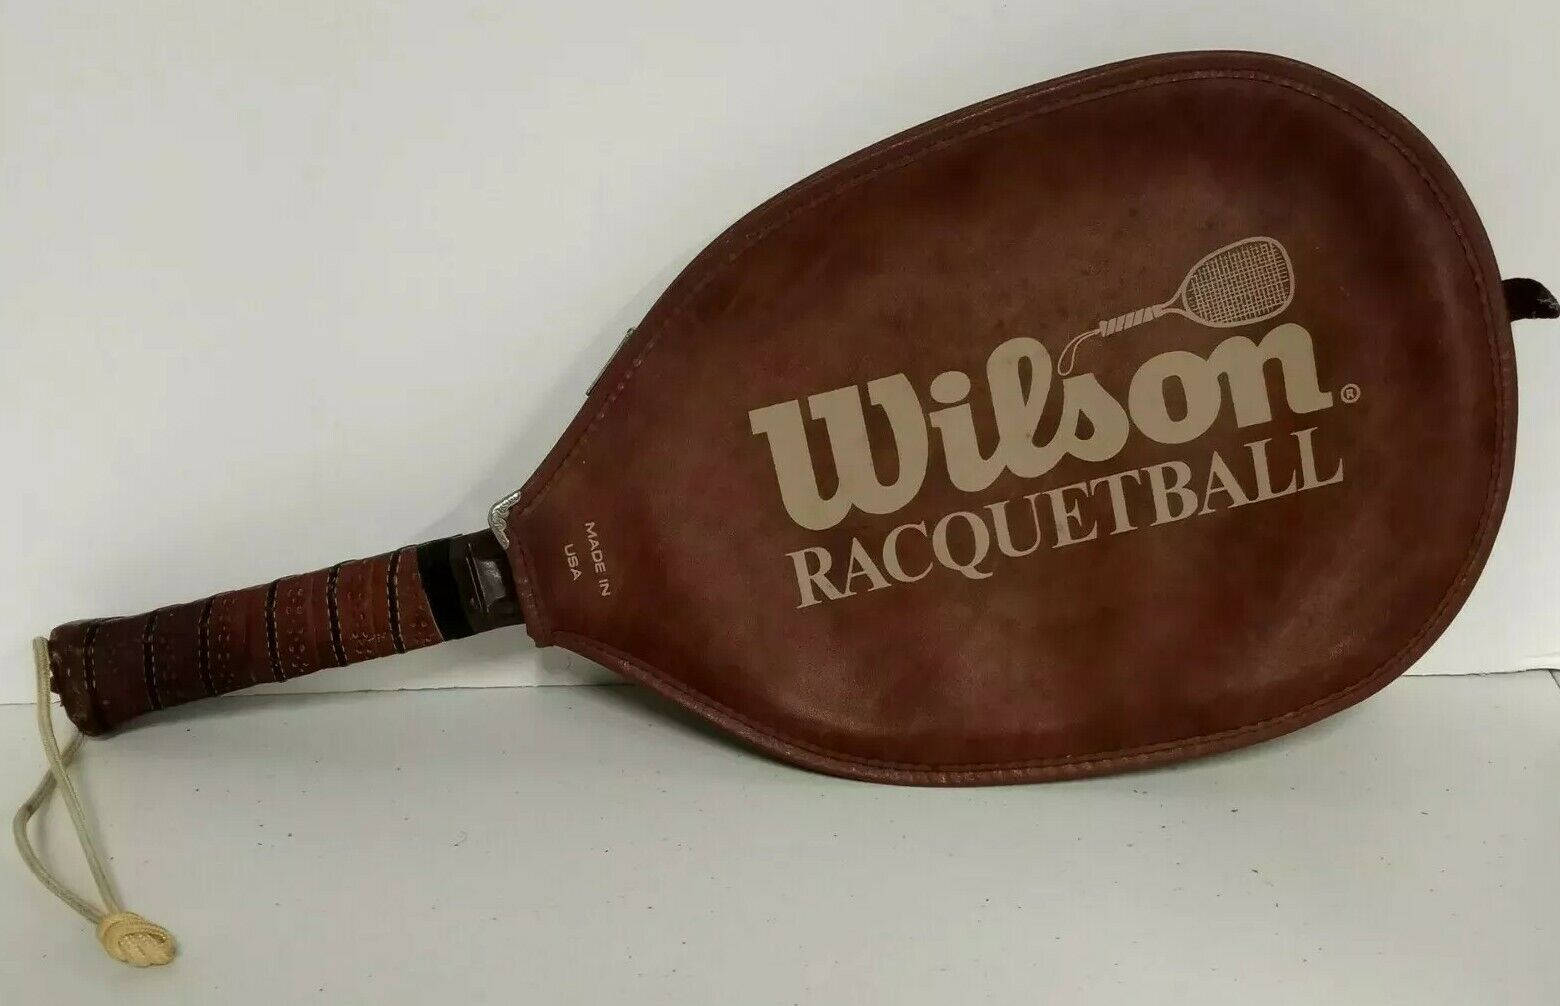 Racquetball Racket In Leather Wilson Jacket Wallpaper